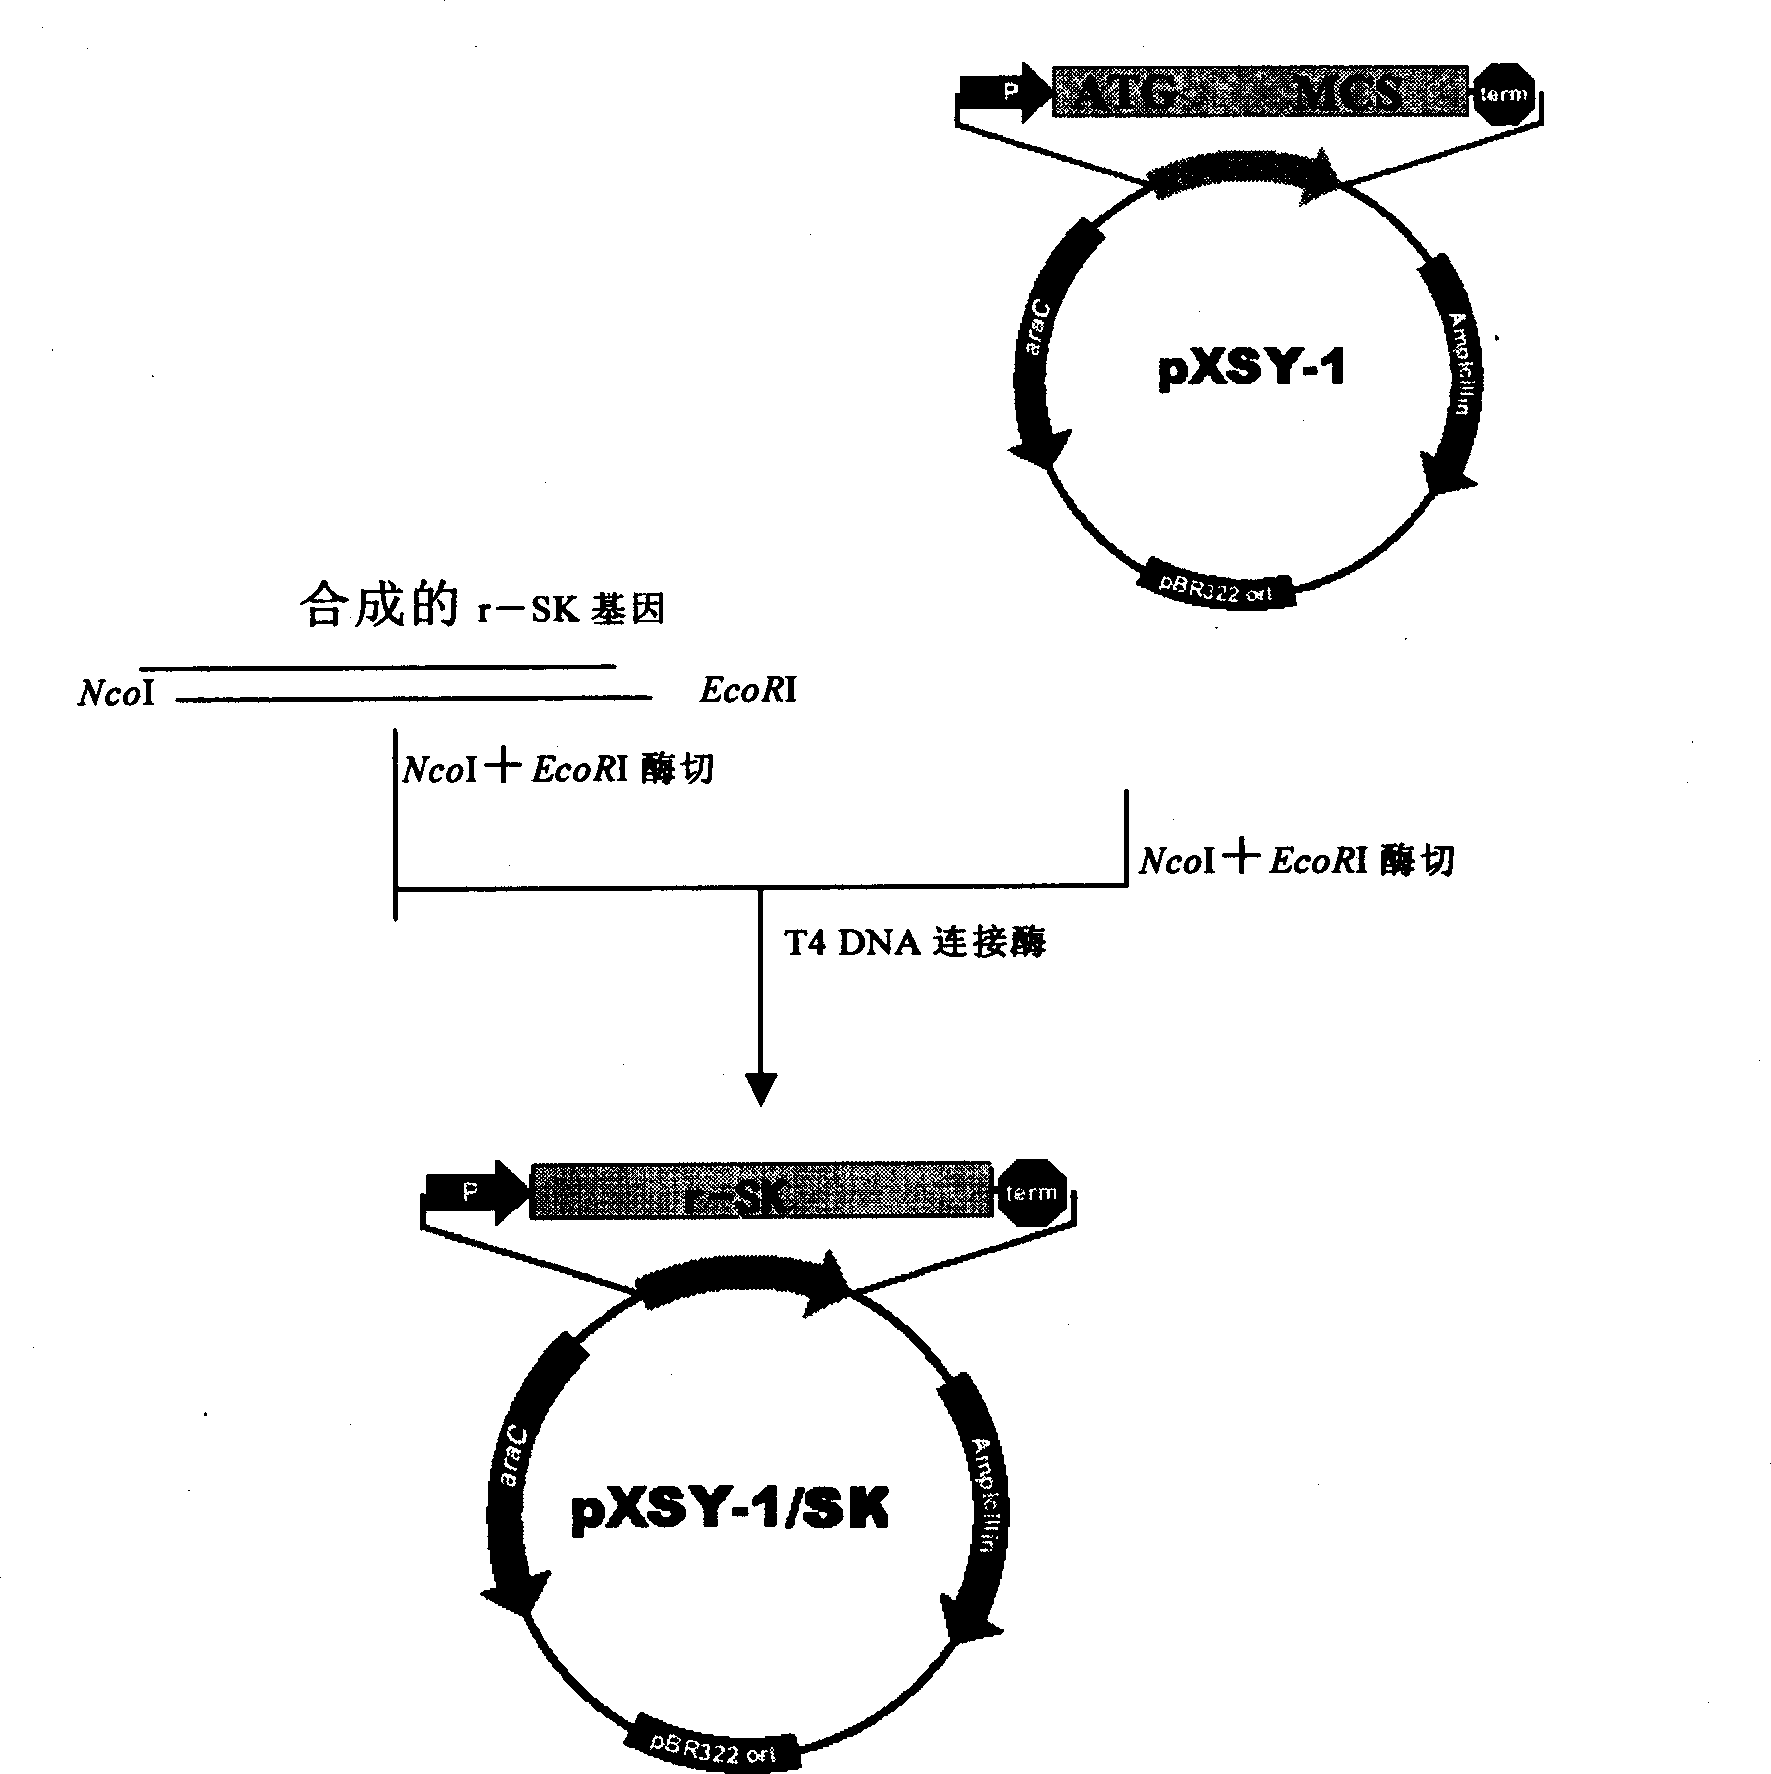 Method for producing recombined streptokinase